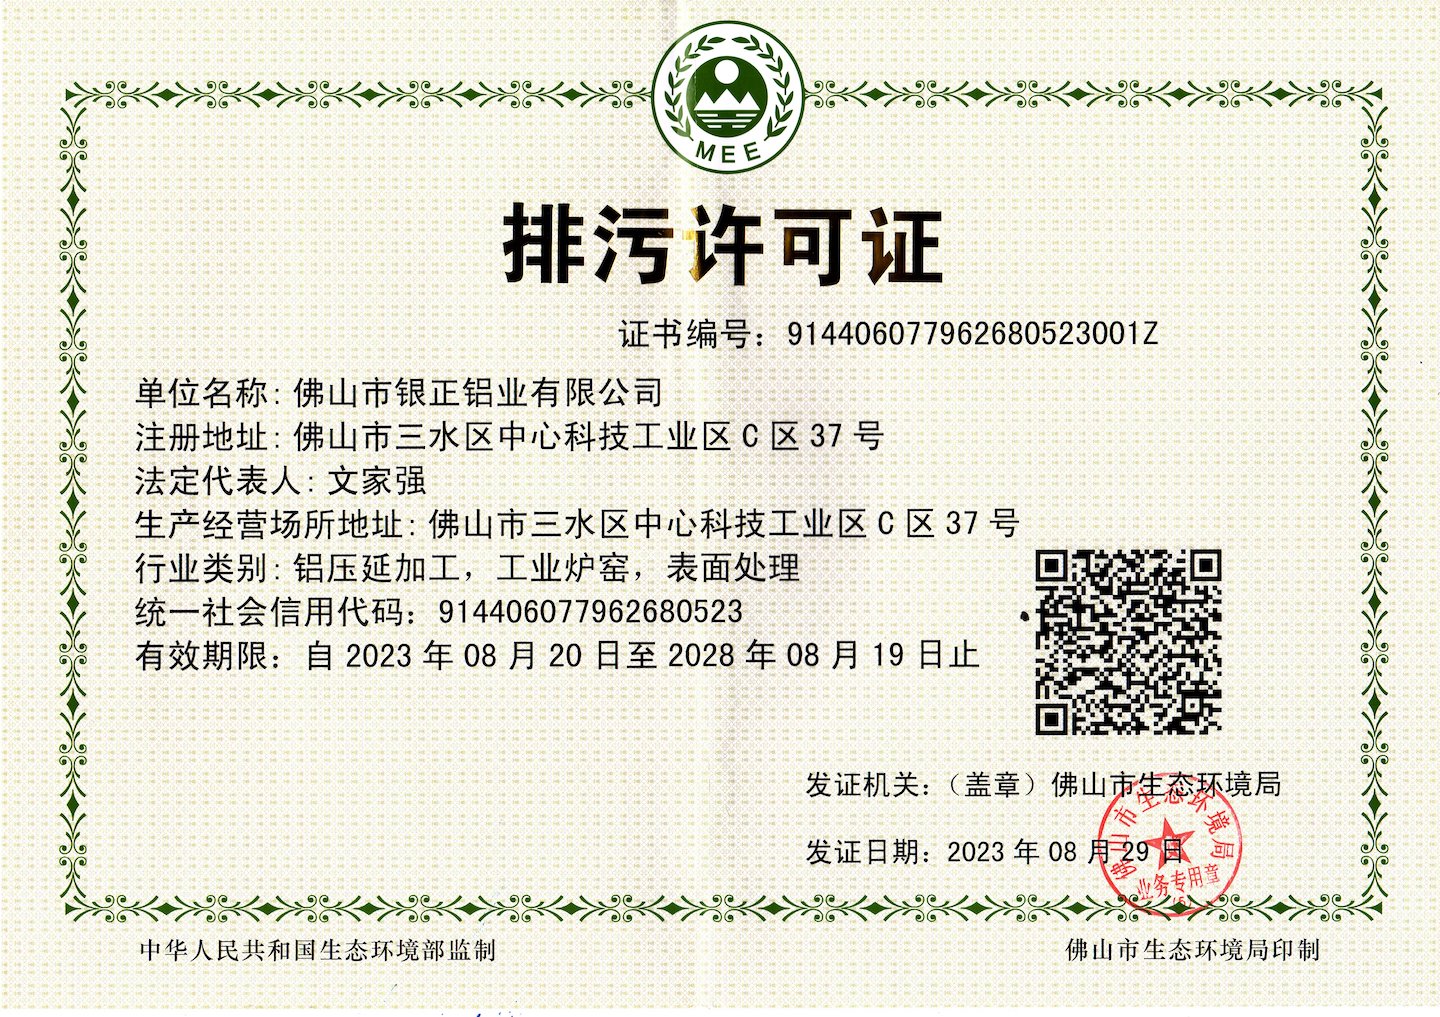 Guangdong Province Pollutant Discharge Permit